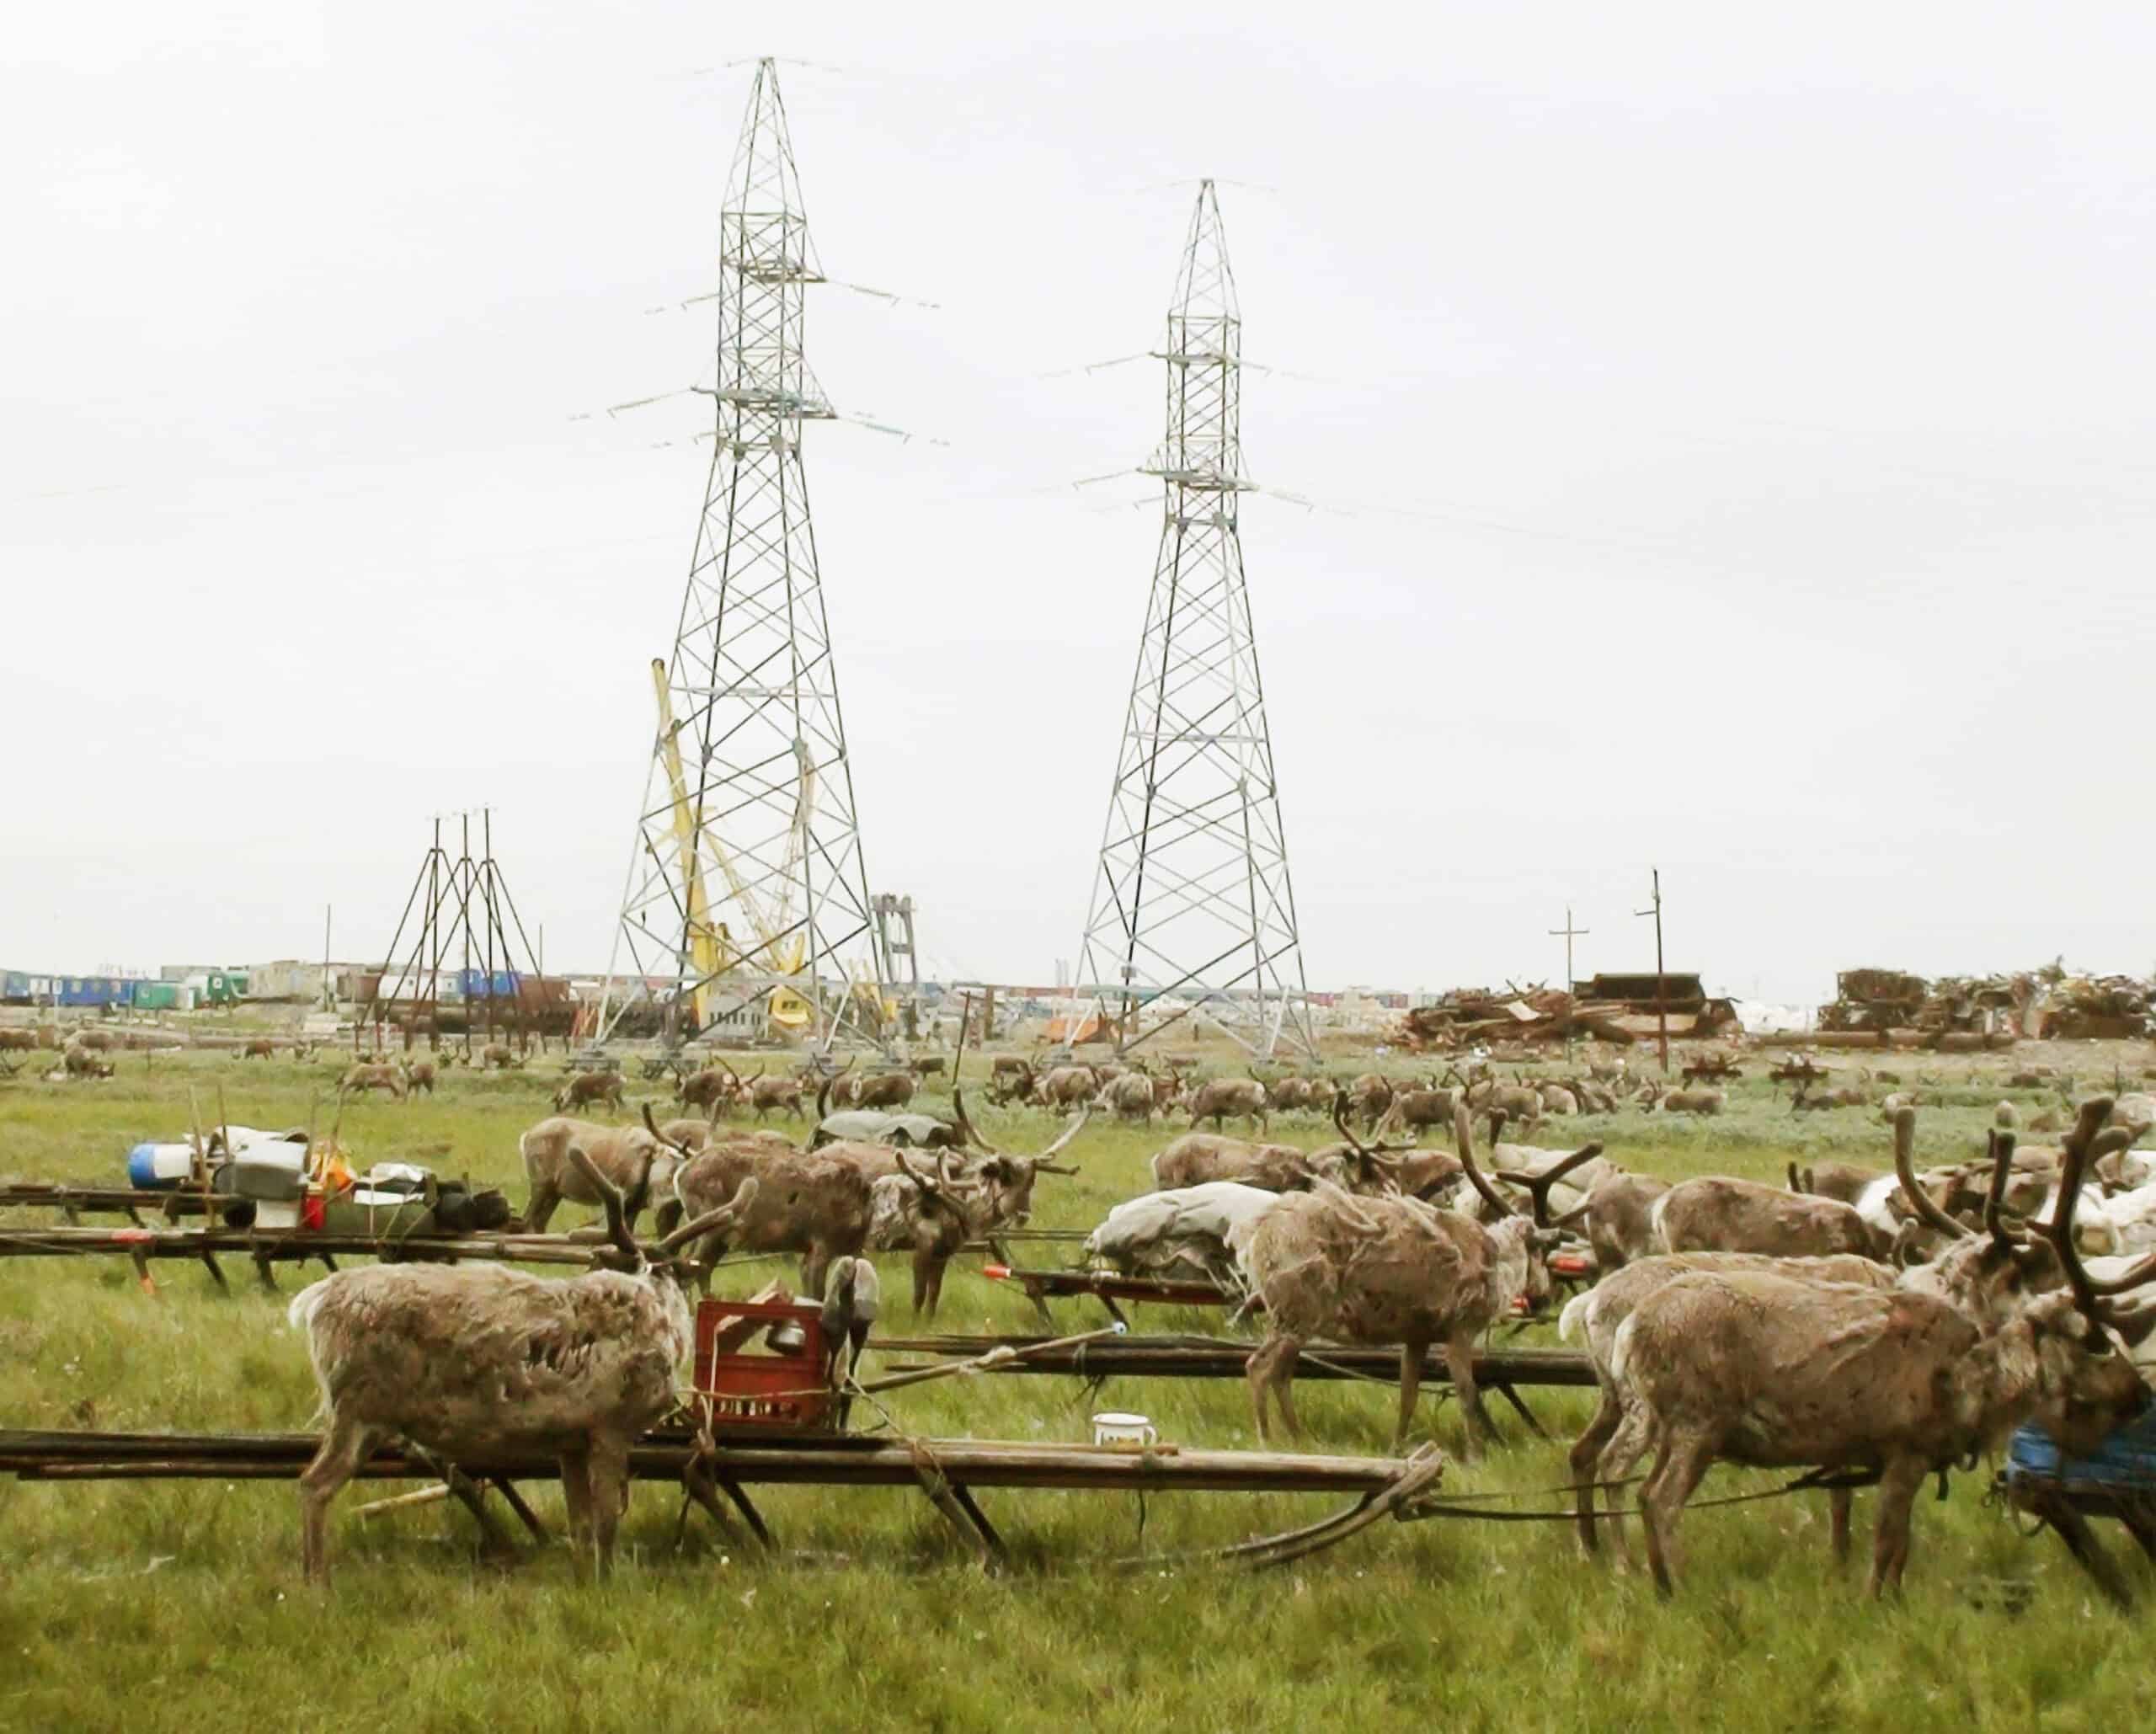 Reindeer pasturing next to gas extraction machinery